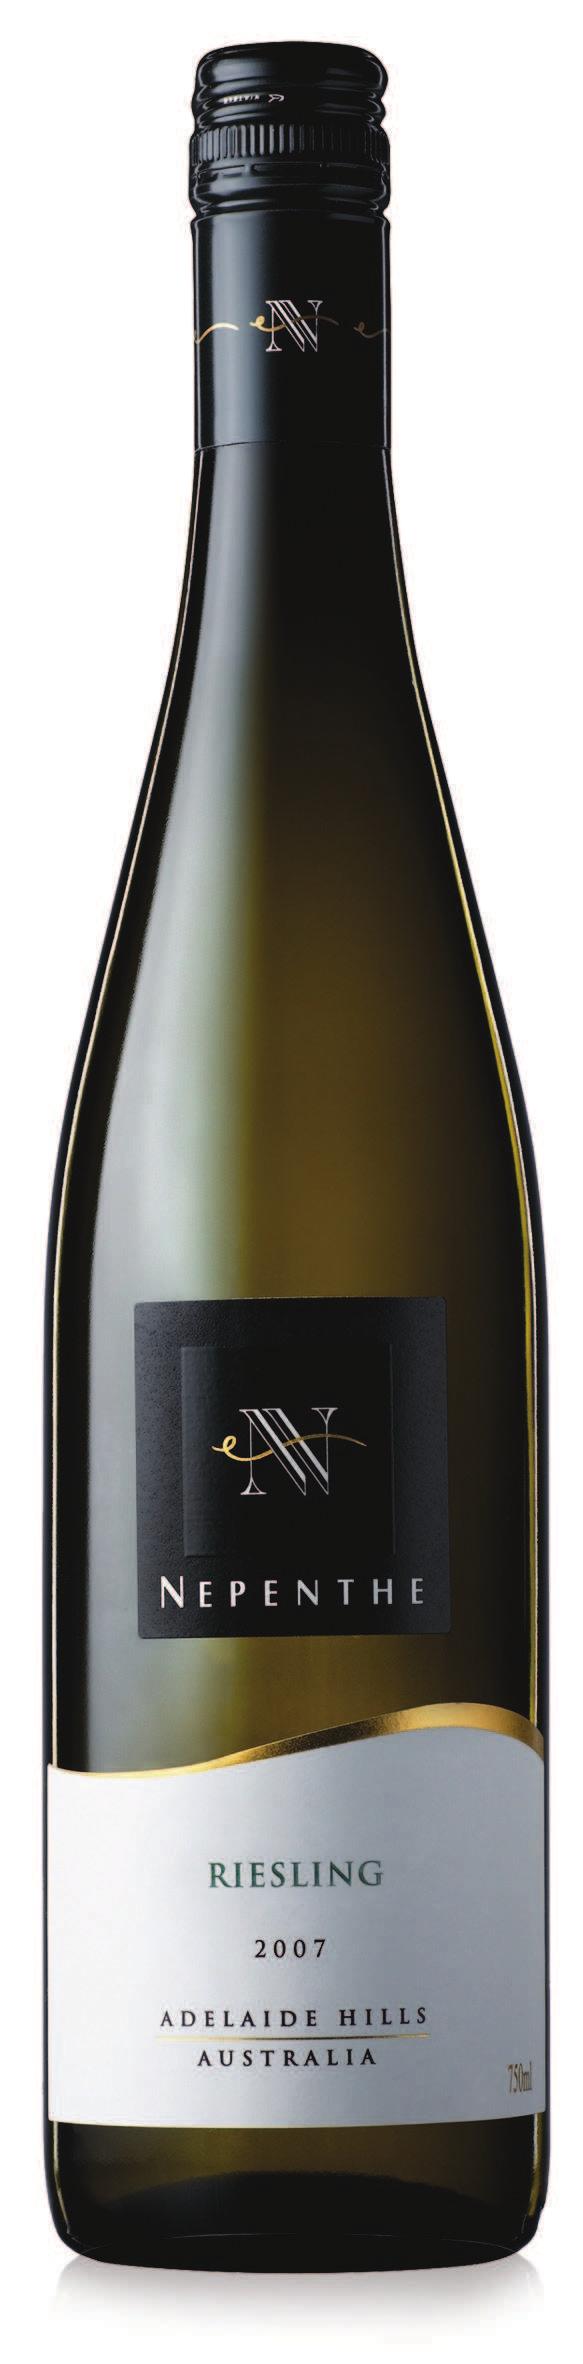 normal price 18. 99 per bottle SAVE 3.20 16.1 22.99 Nepenthe Riesling 2007 Nepenthe purchased this Adelaide Hills winery back in 199, whose vineyards produced an exotic array of grape varieties.